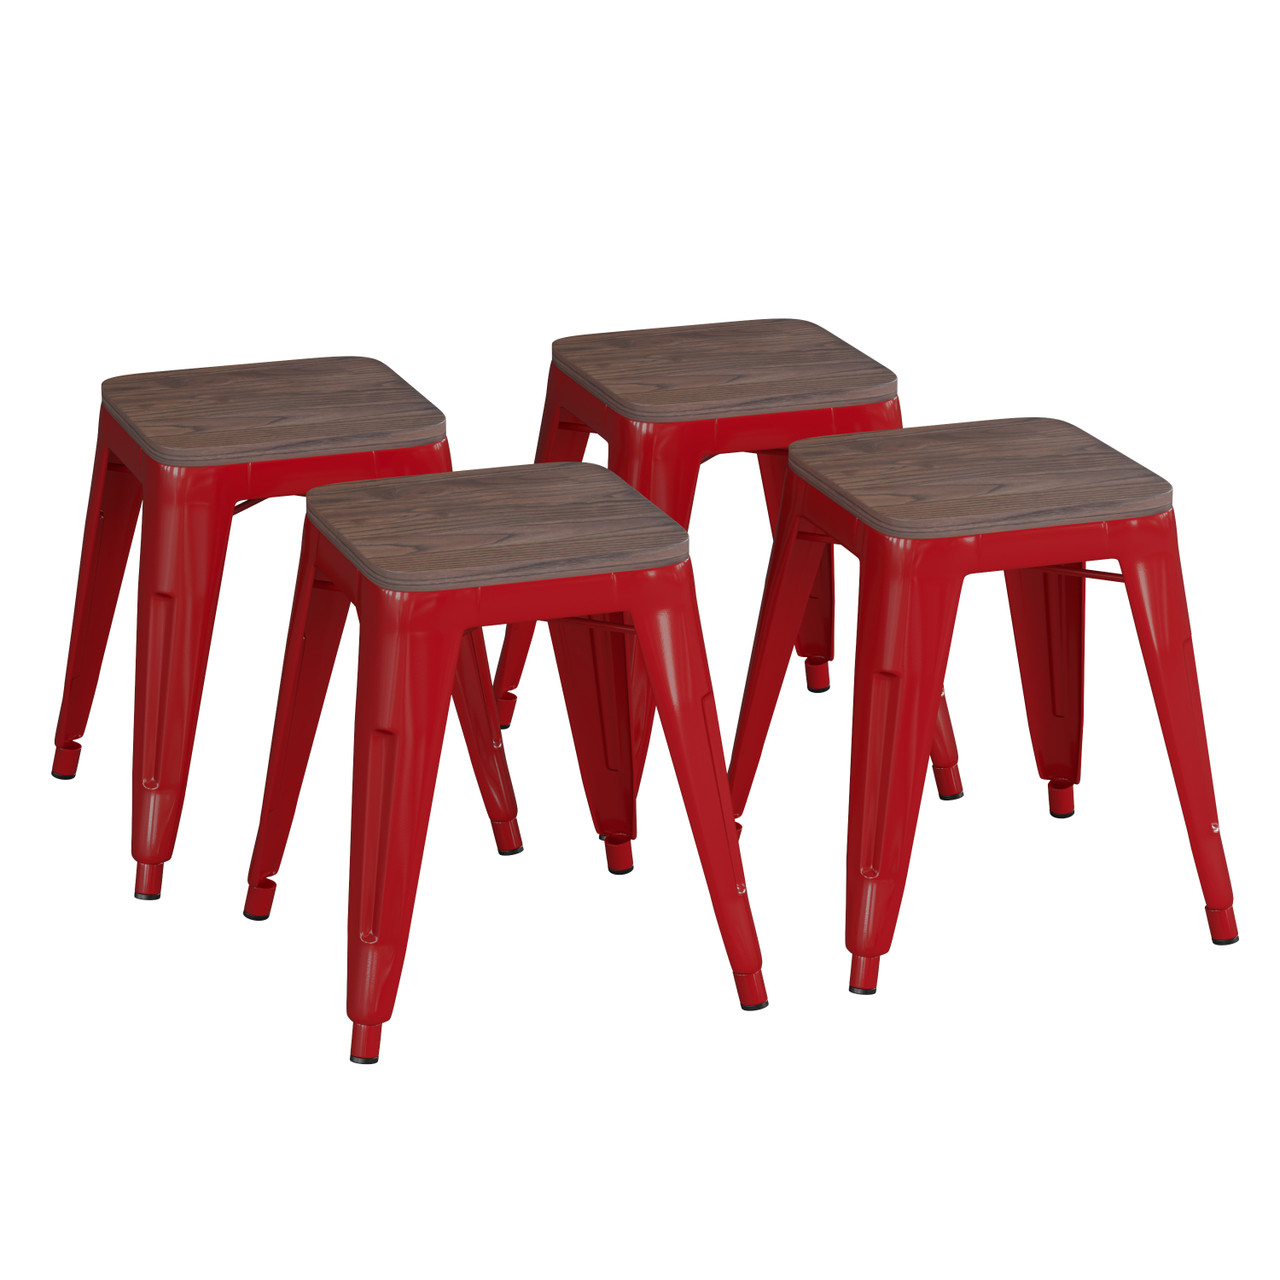 Flash Furniture Kai 18" Backless Table Height Stool w/ Wooden Seat, Stackable Red Metal Indoor Dining Stool, Commercial Grade Set of 4, Model#